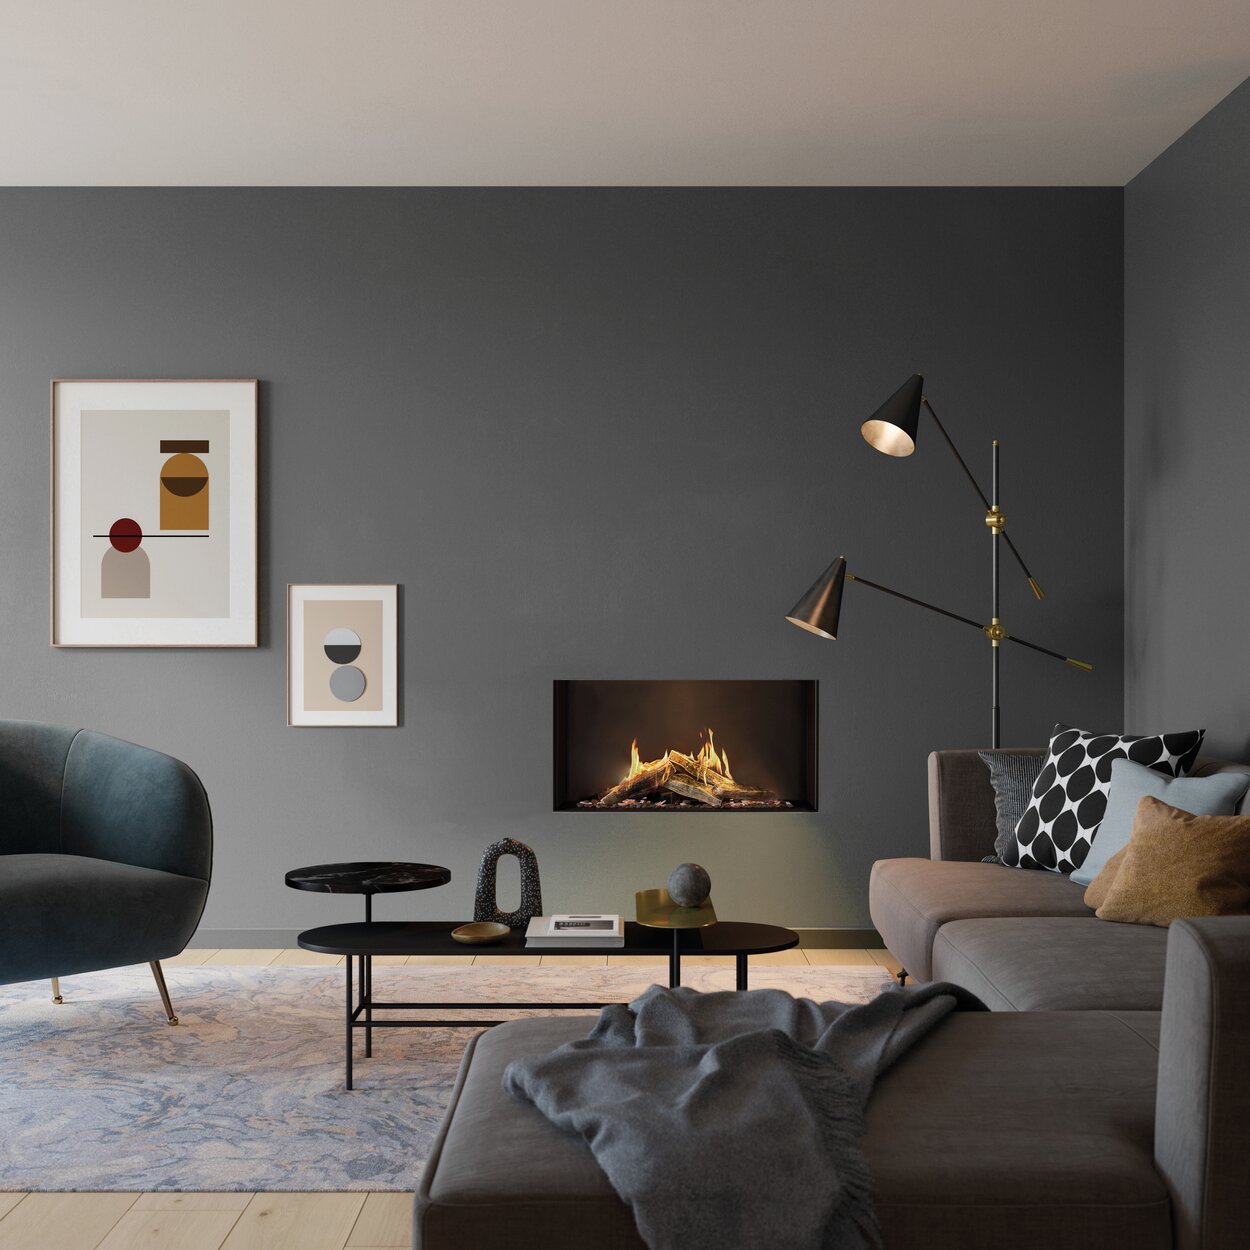 VISIO 90 F gas fireplace as a front fireplace in a sage green wall surrounded by matching furniture in a minimalist, stylishly furnished living room